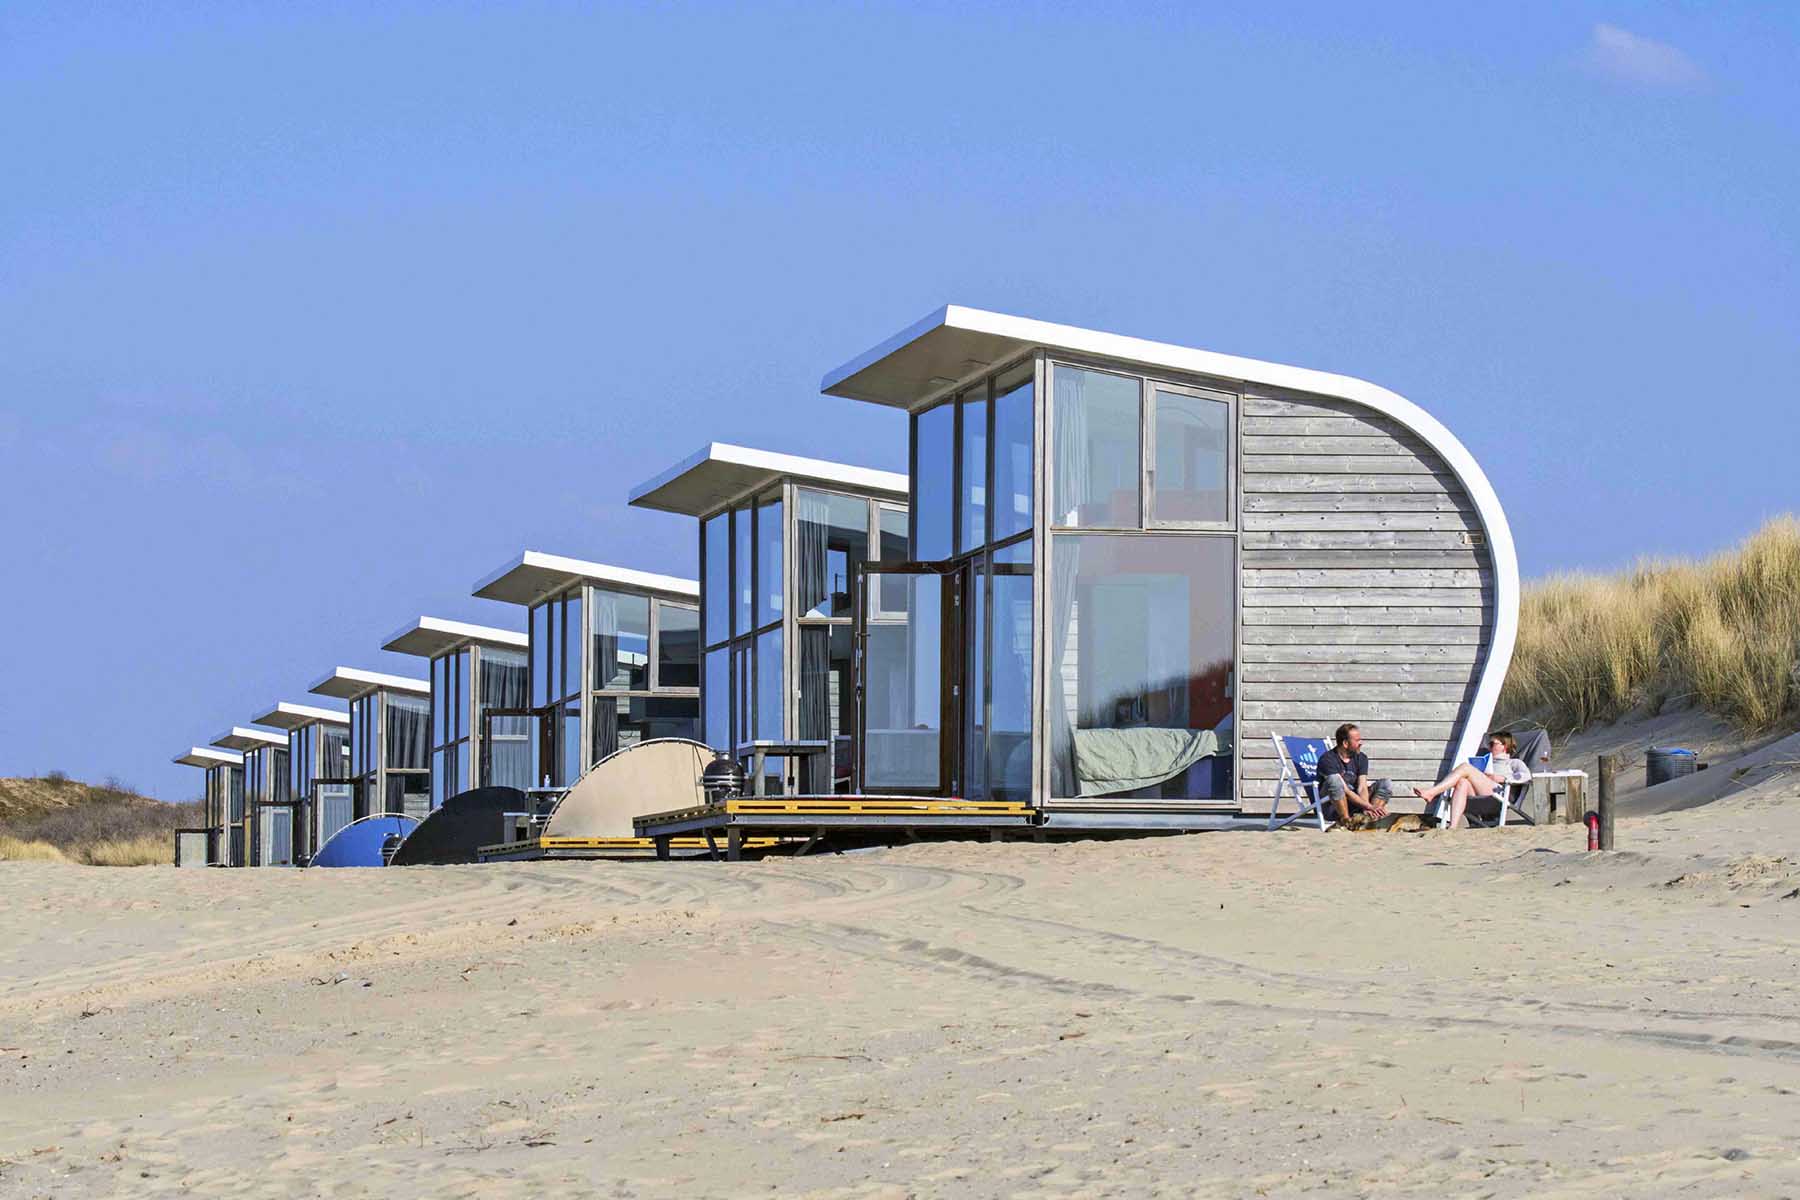 Row of tiny rental houses on sandy beach along the North Sea coast at Groede, the Netherlands.